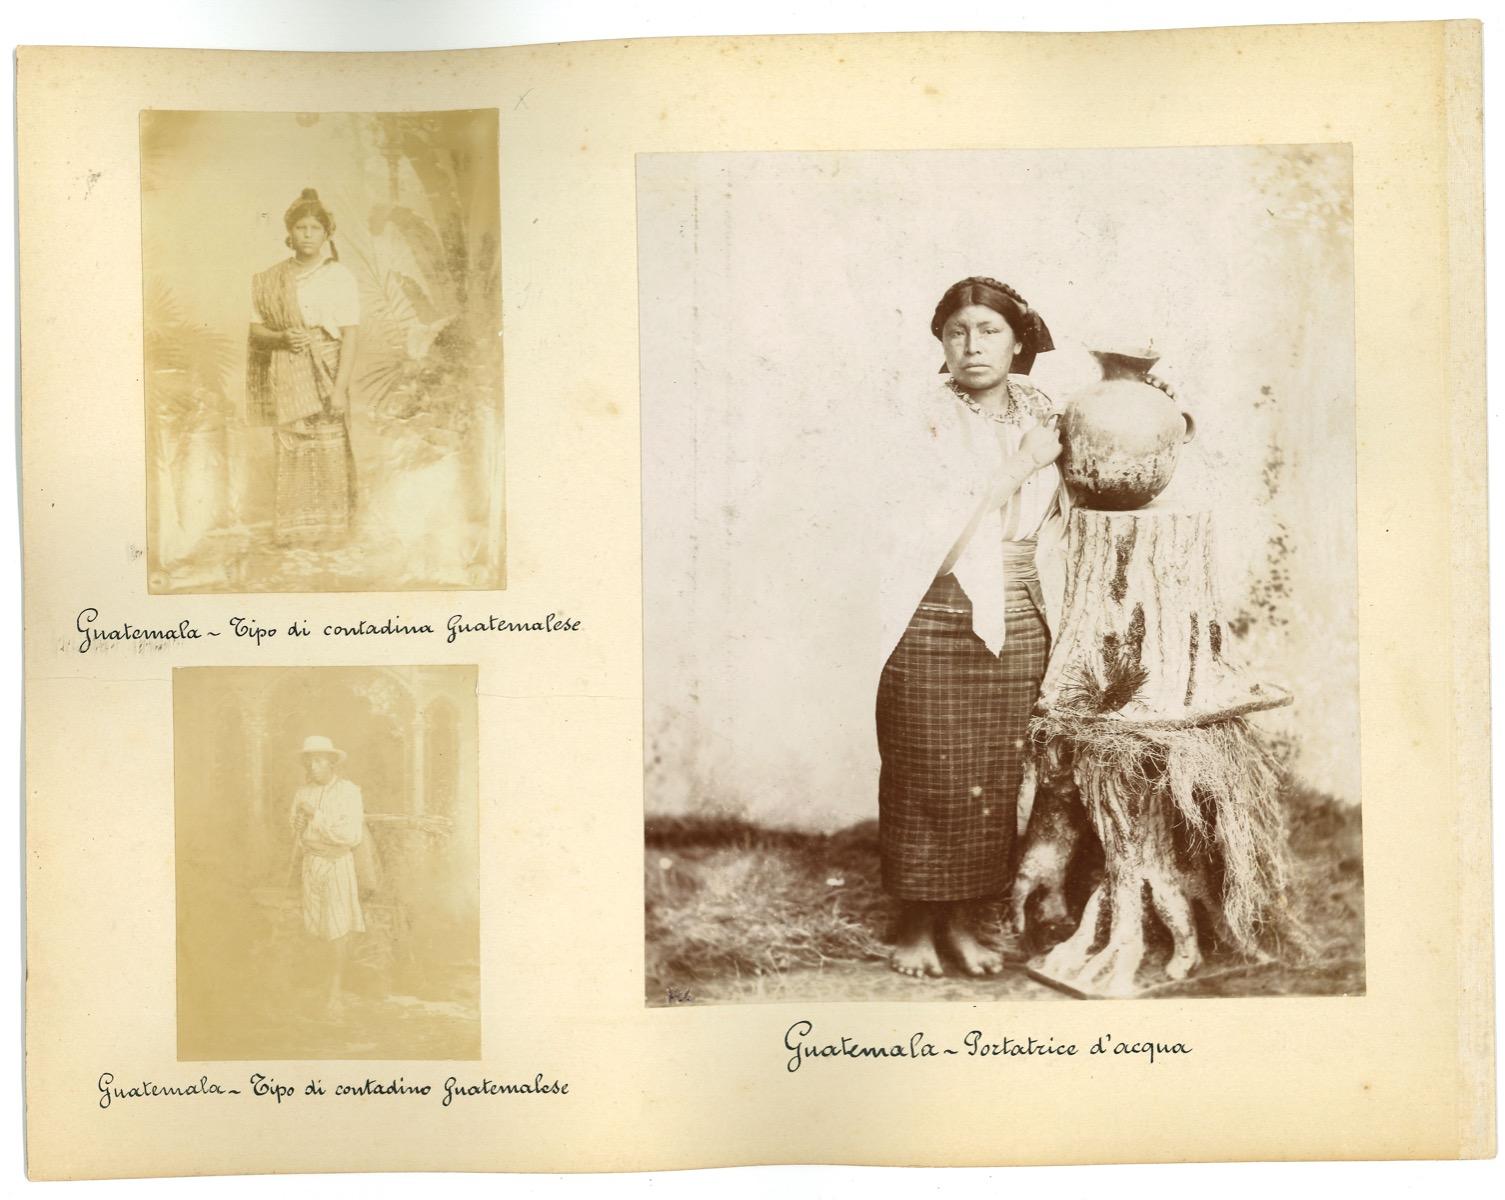 Unknown Figurative Photograph - Ancient Customs and Traditions of Guatemala - Original Vintage Photos - 1880s